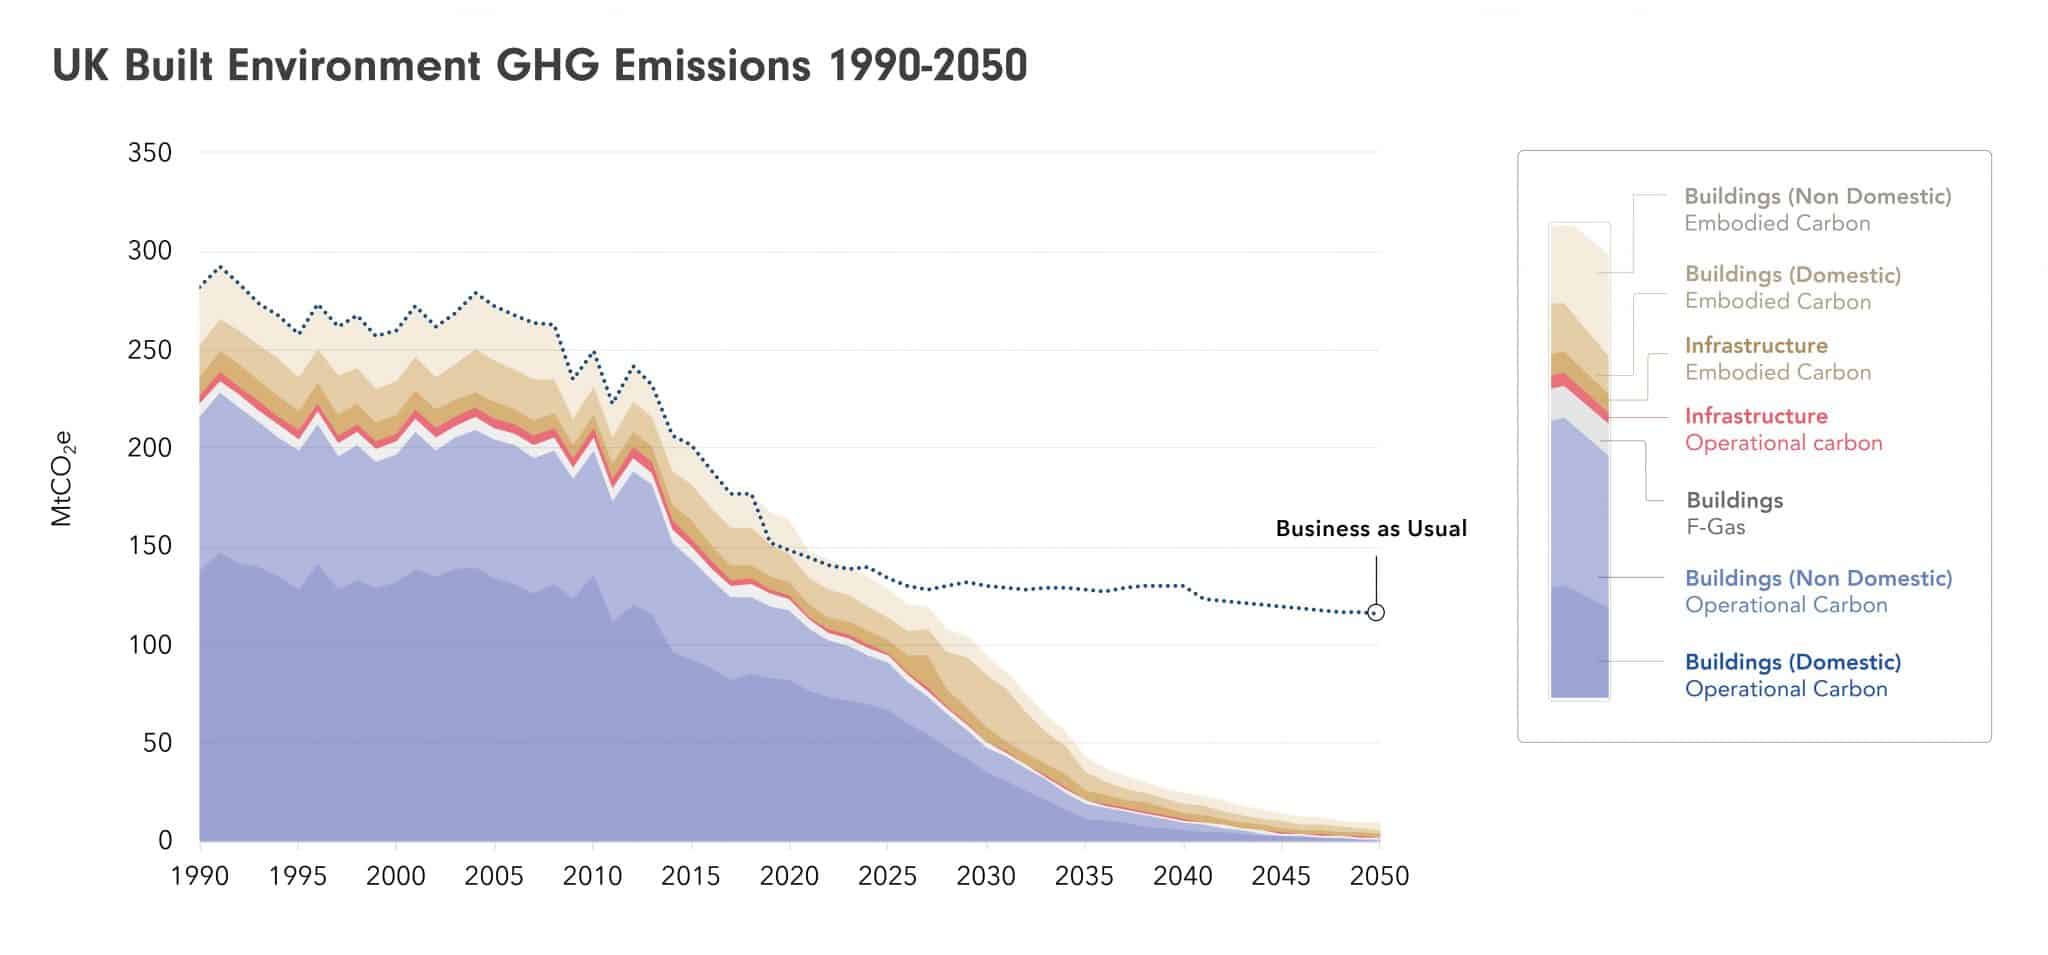 UK Built Environment GHG Emissions 1990-2050 by UK Green Building Council